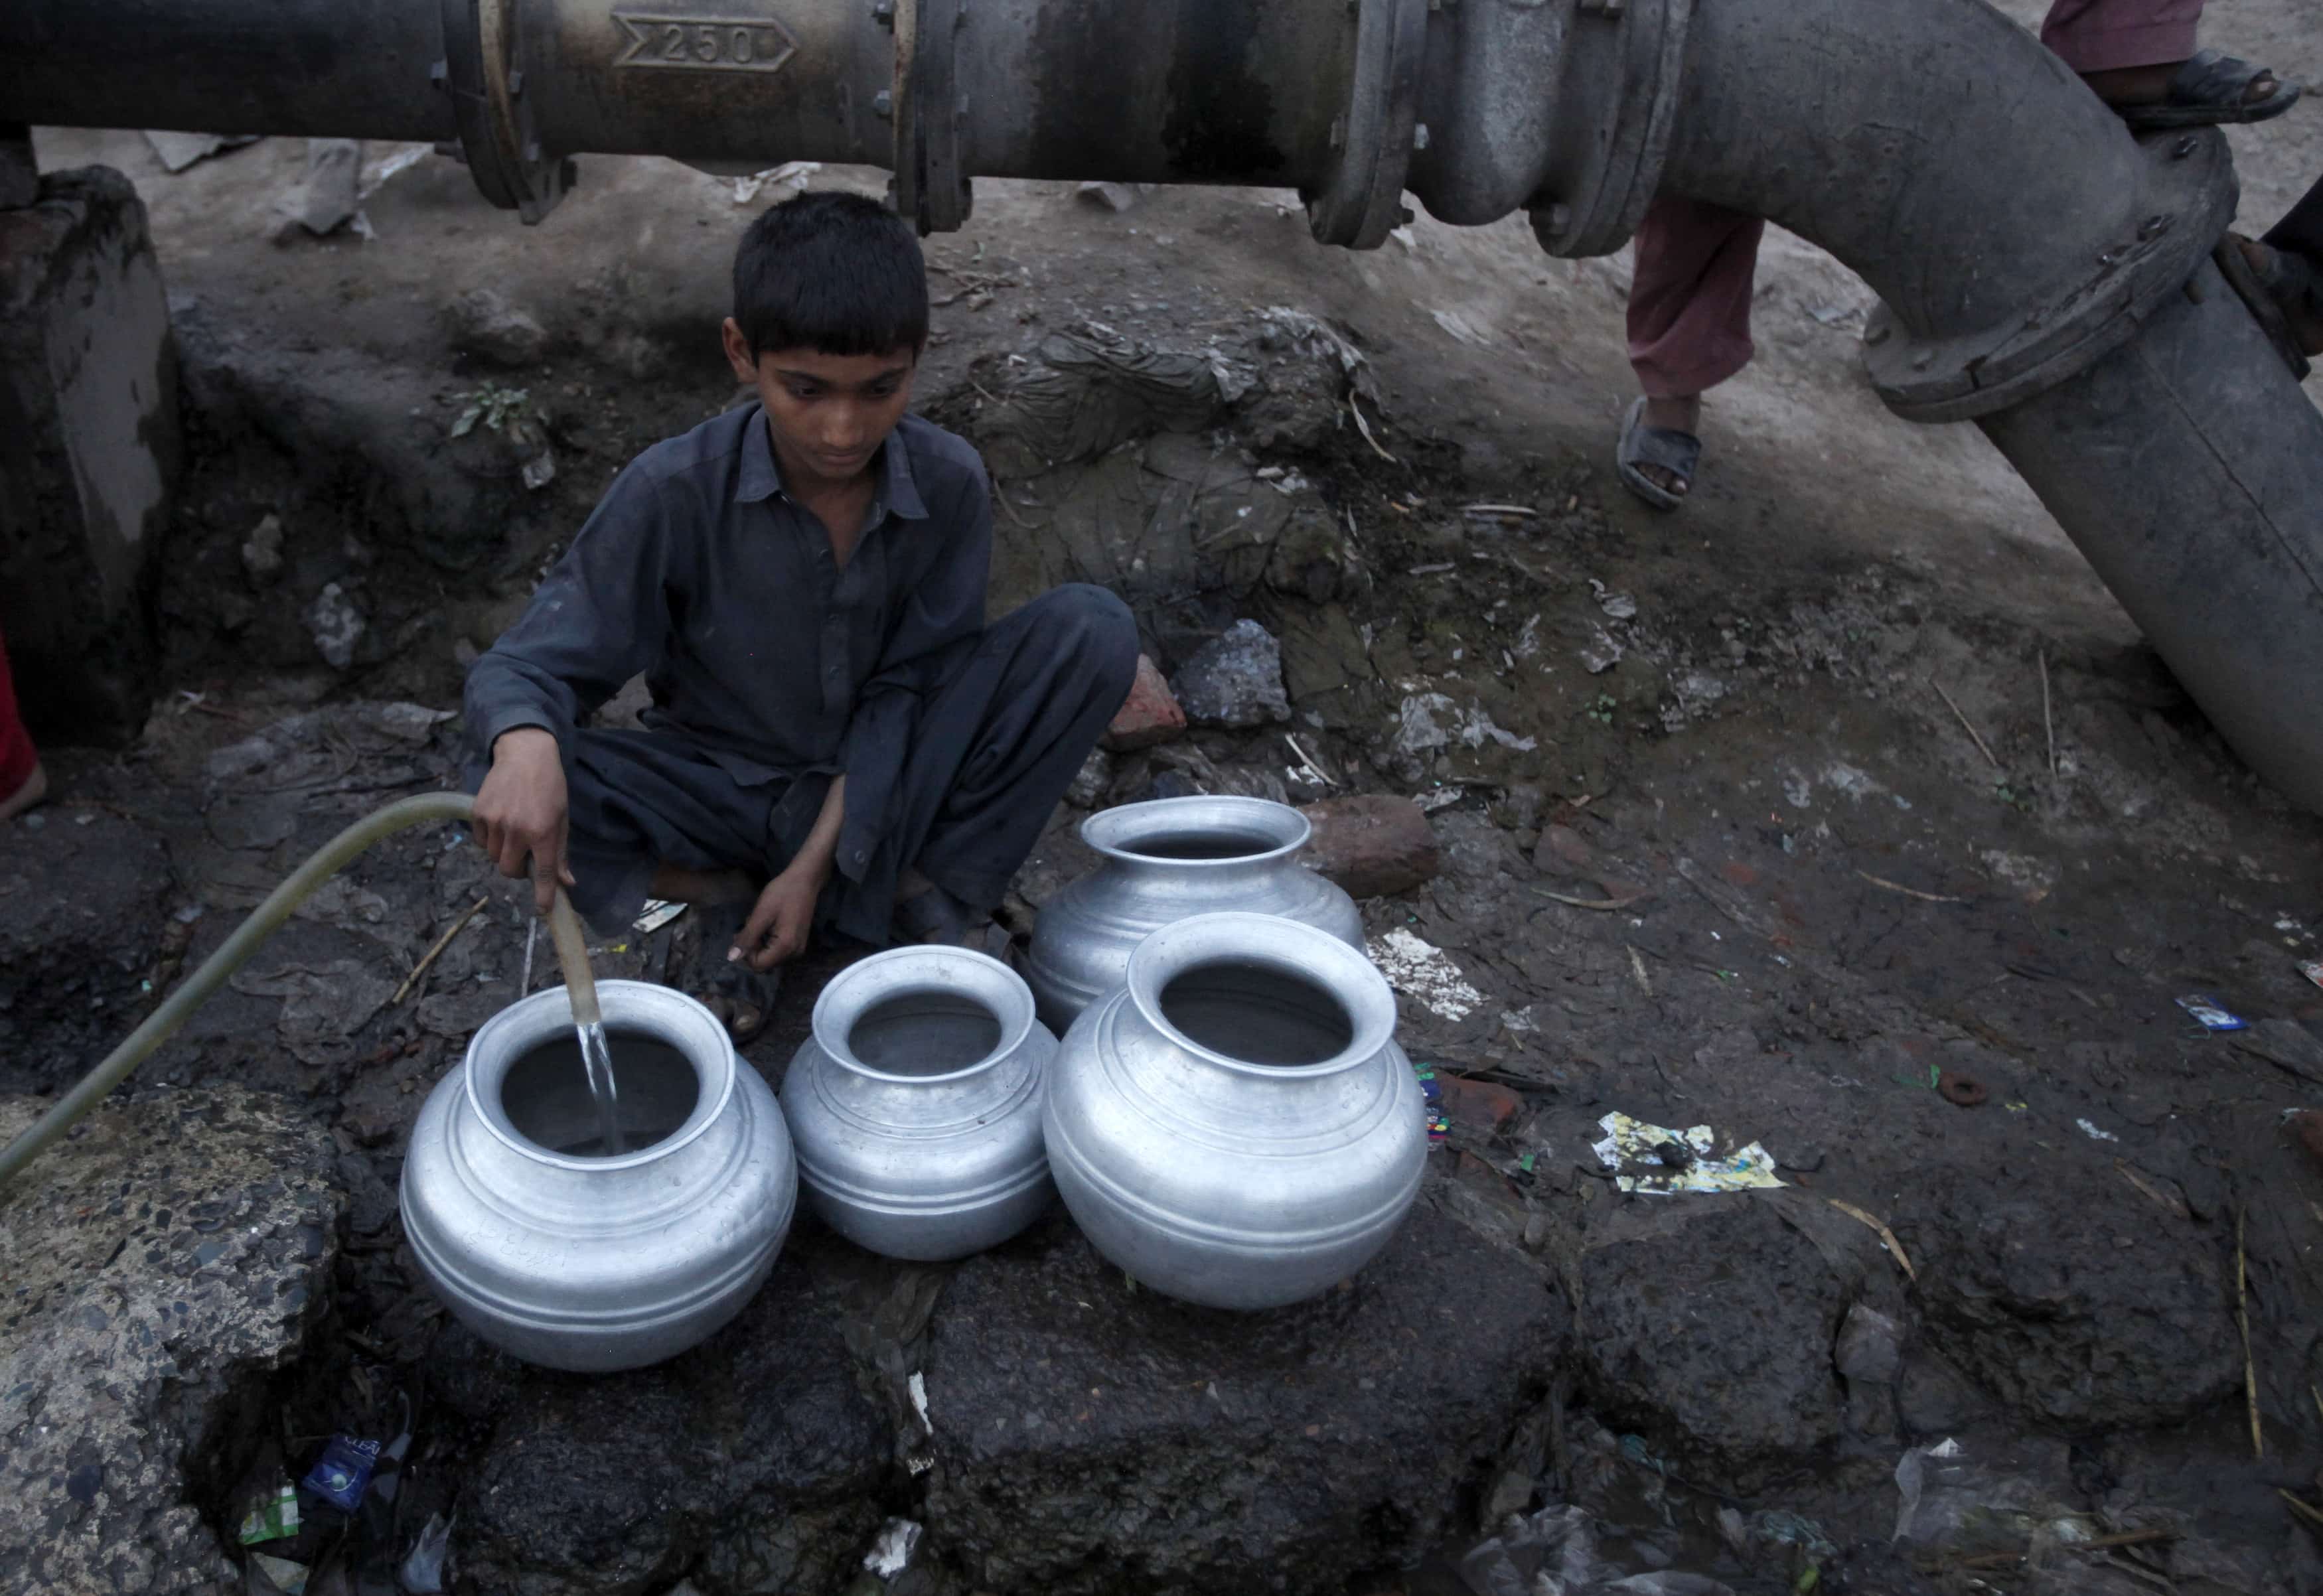 A boy collects drinking water for his family in a slum on the outskirts of Lahore, 21 March 2014. World Water Day will be marked on 22 March, REUTERS/Mohsin Raza